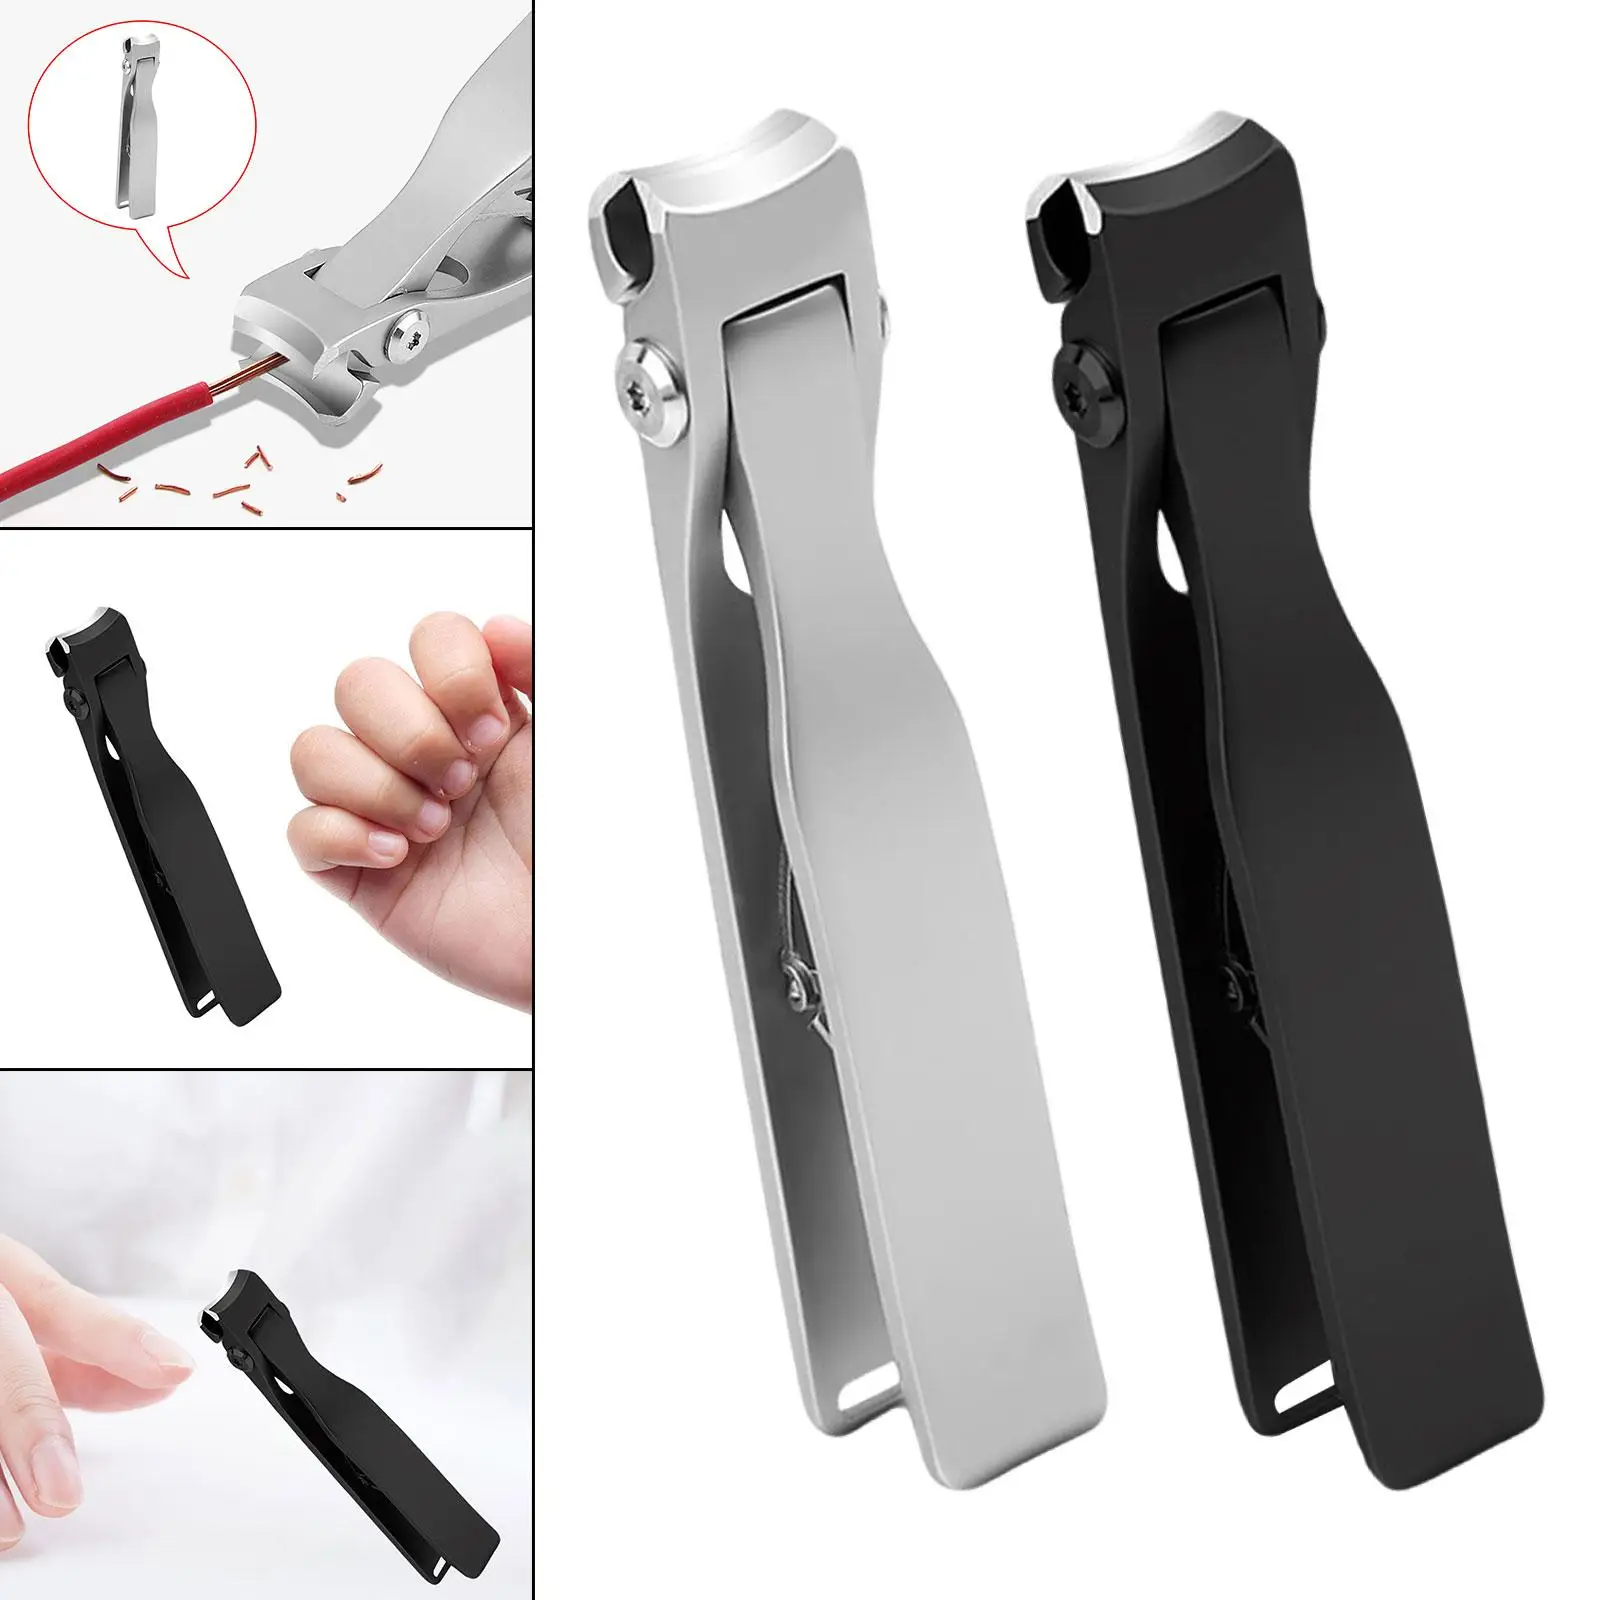 Nail Clippers Nail Trimmer Wide Opening Premium Heavy Duty Zinc Alloy Fingernail & Toenail Clippers Nail Cutter for Thick Nails